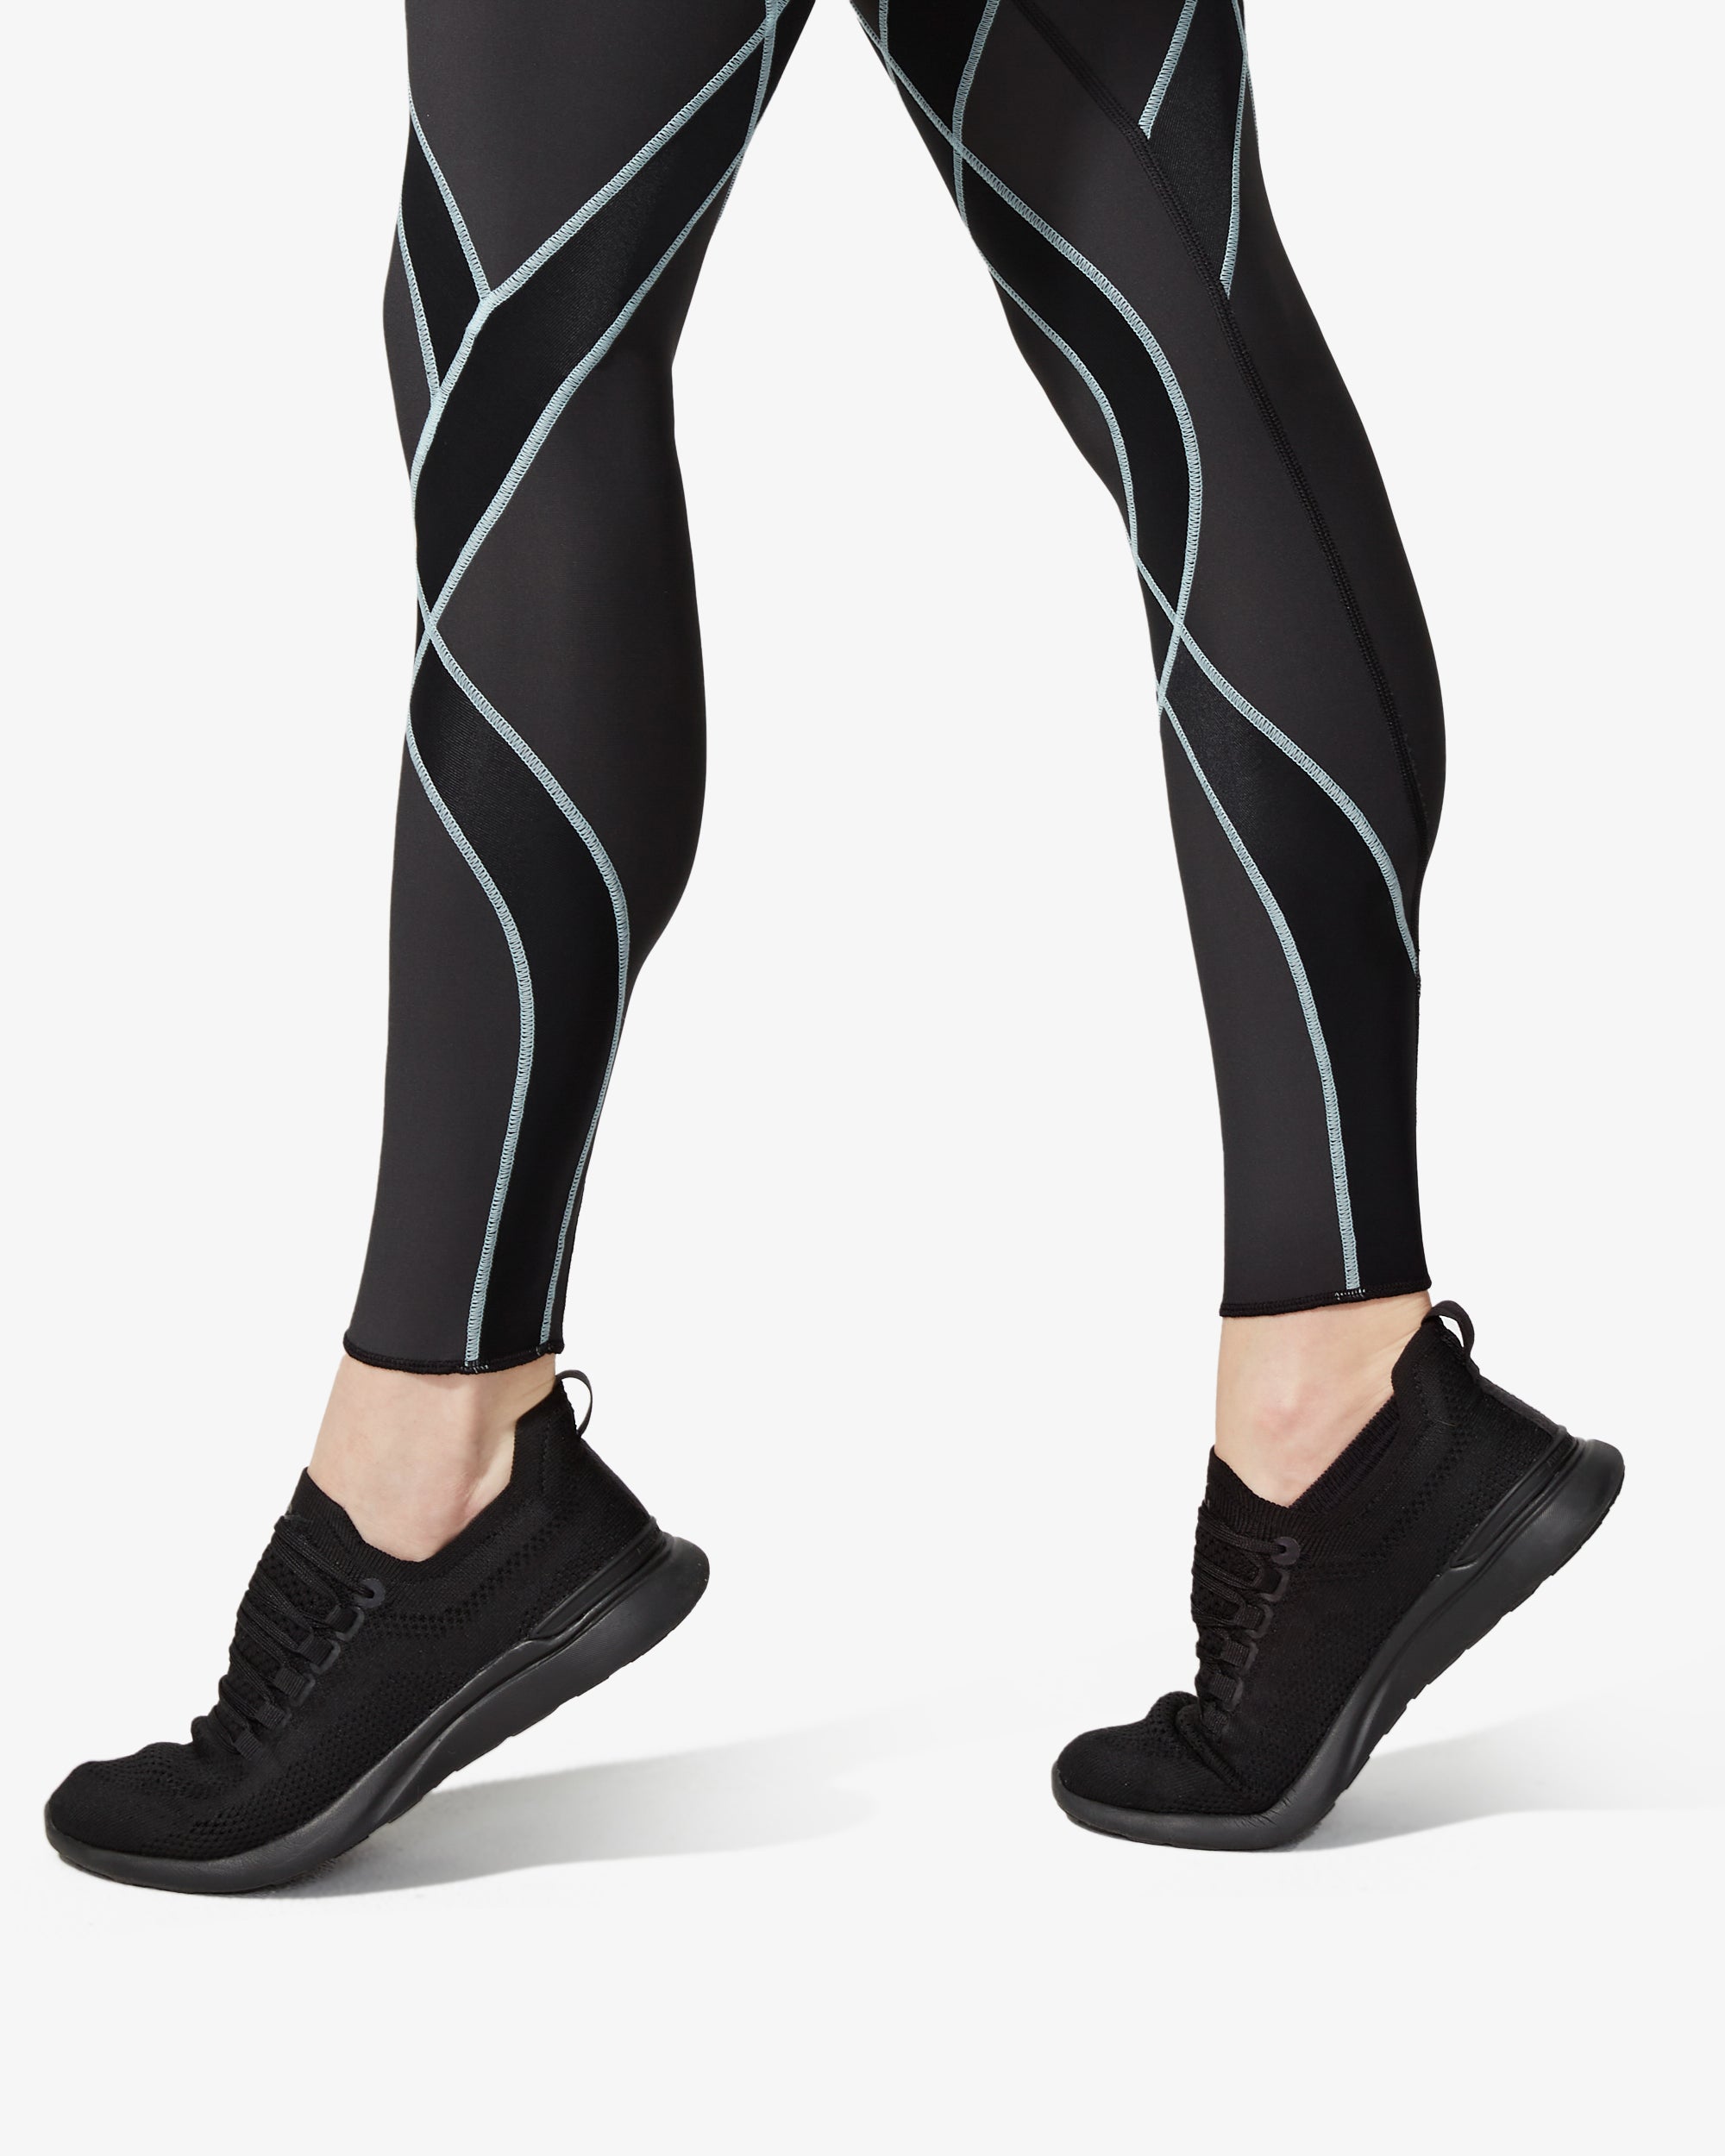 Endurance Generator Insulator Joint & Muscle Support Compression